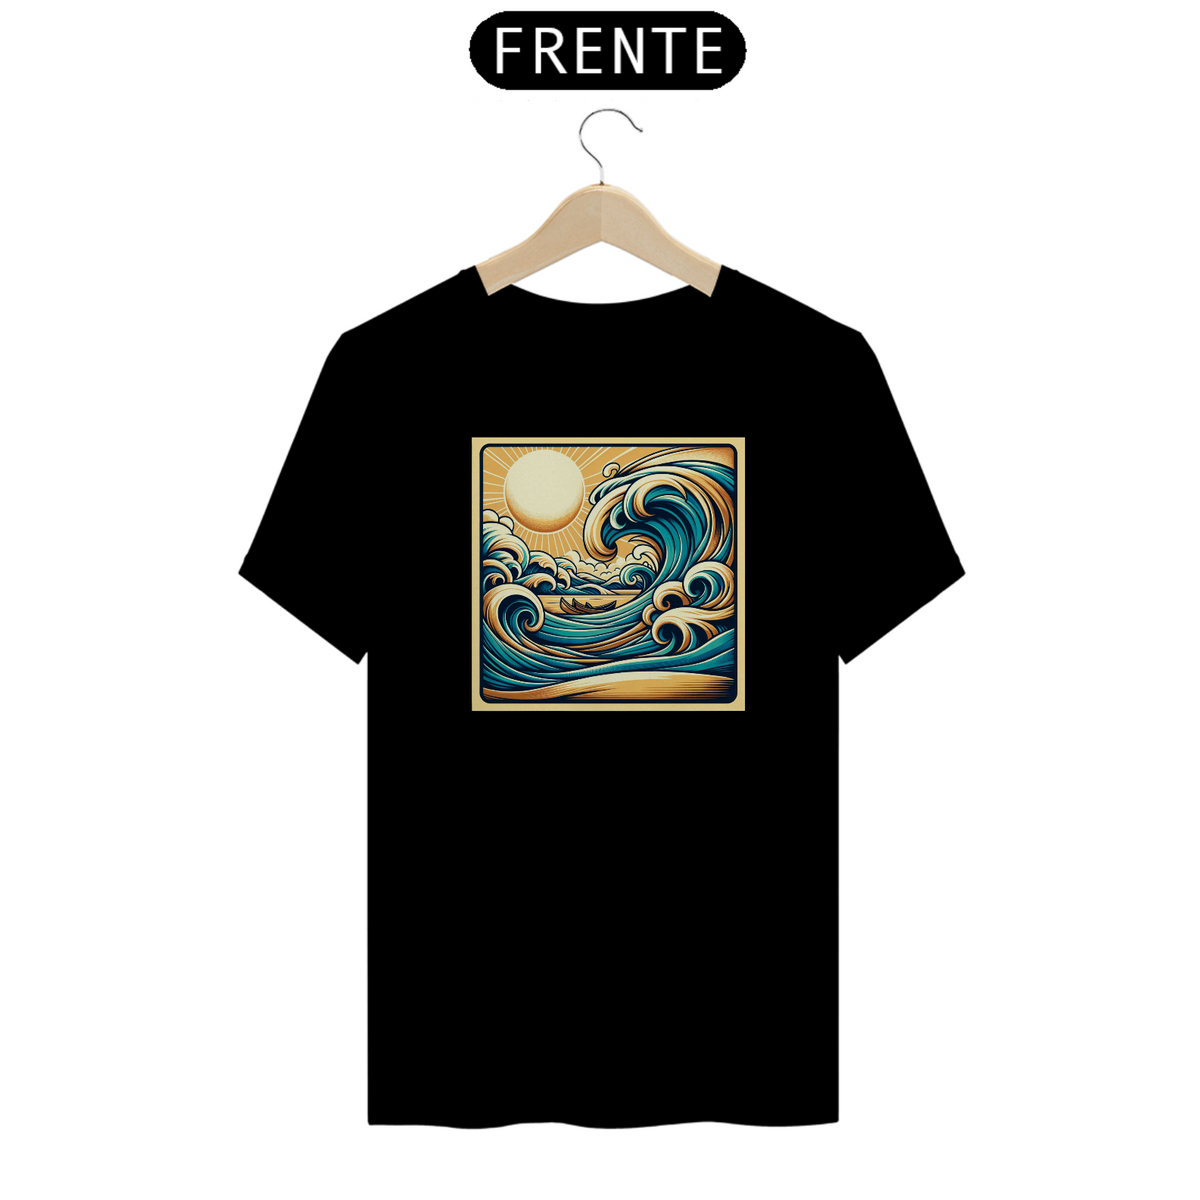 Nome do produto: T-shirt Quality, abstract waves